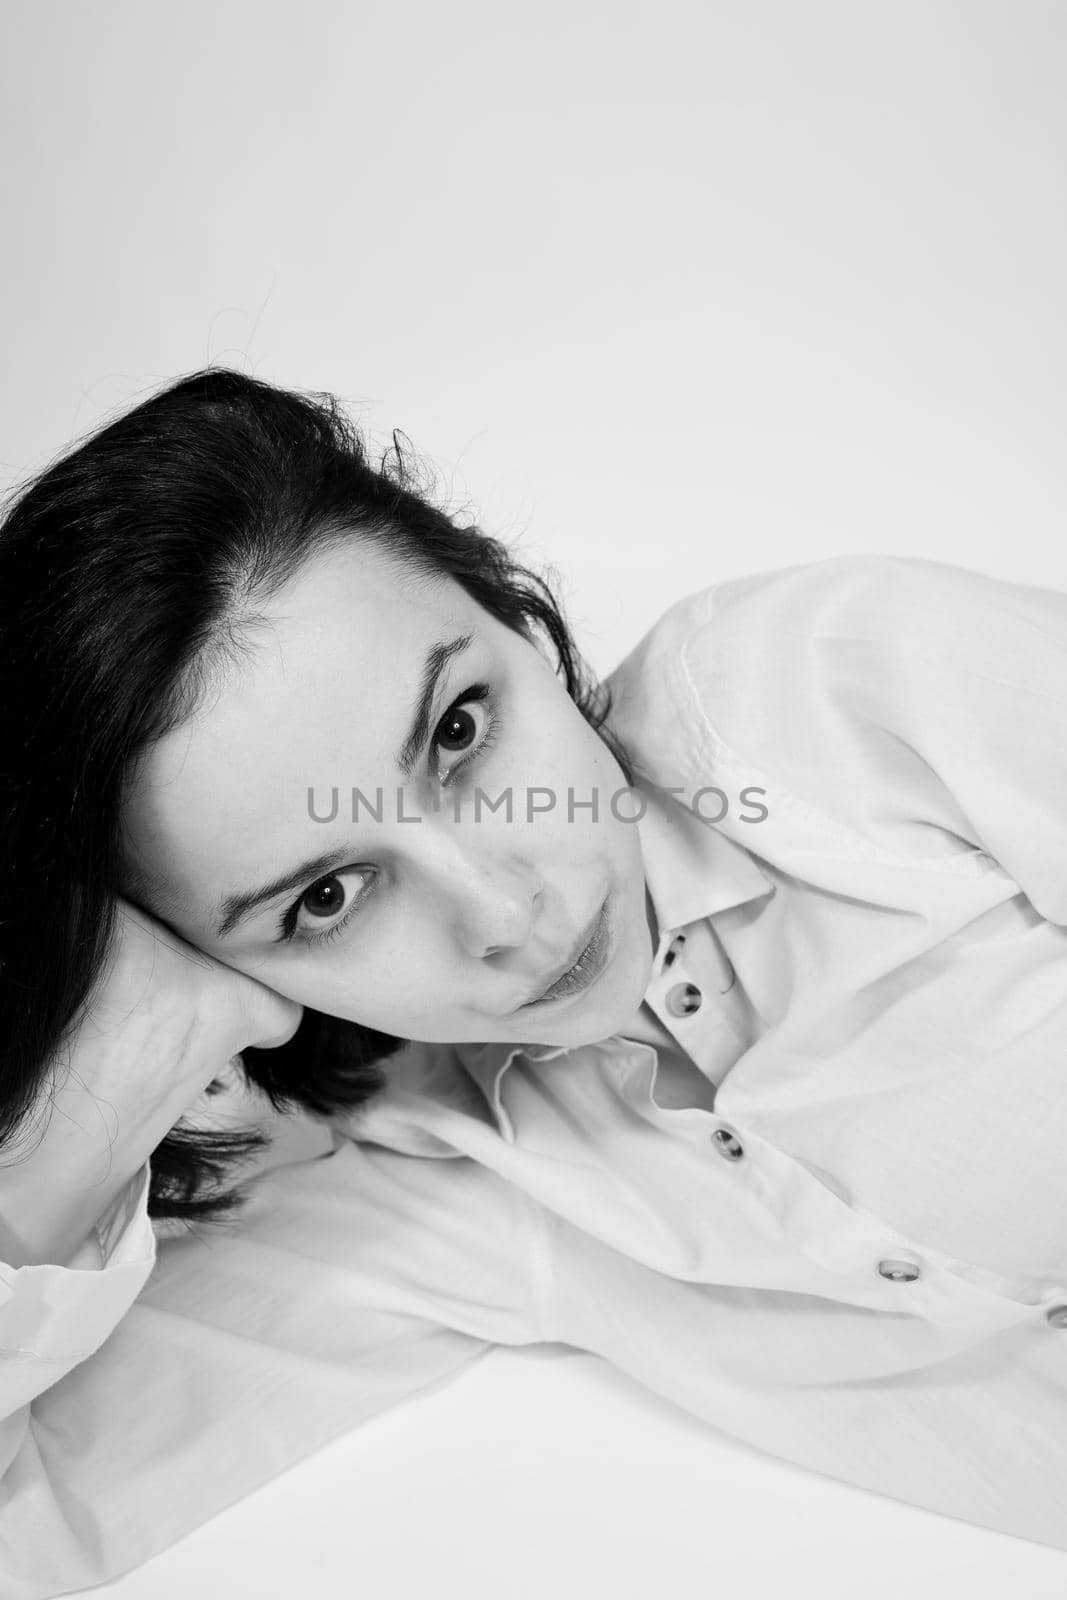 brunette woman lies on the floor, black and white photo. High quality photo